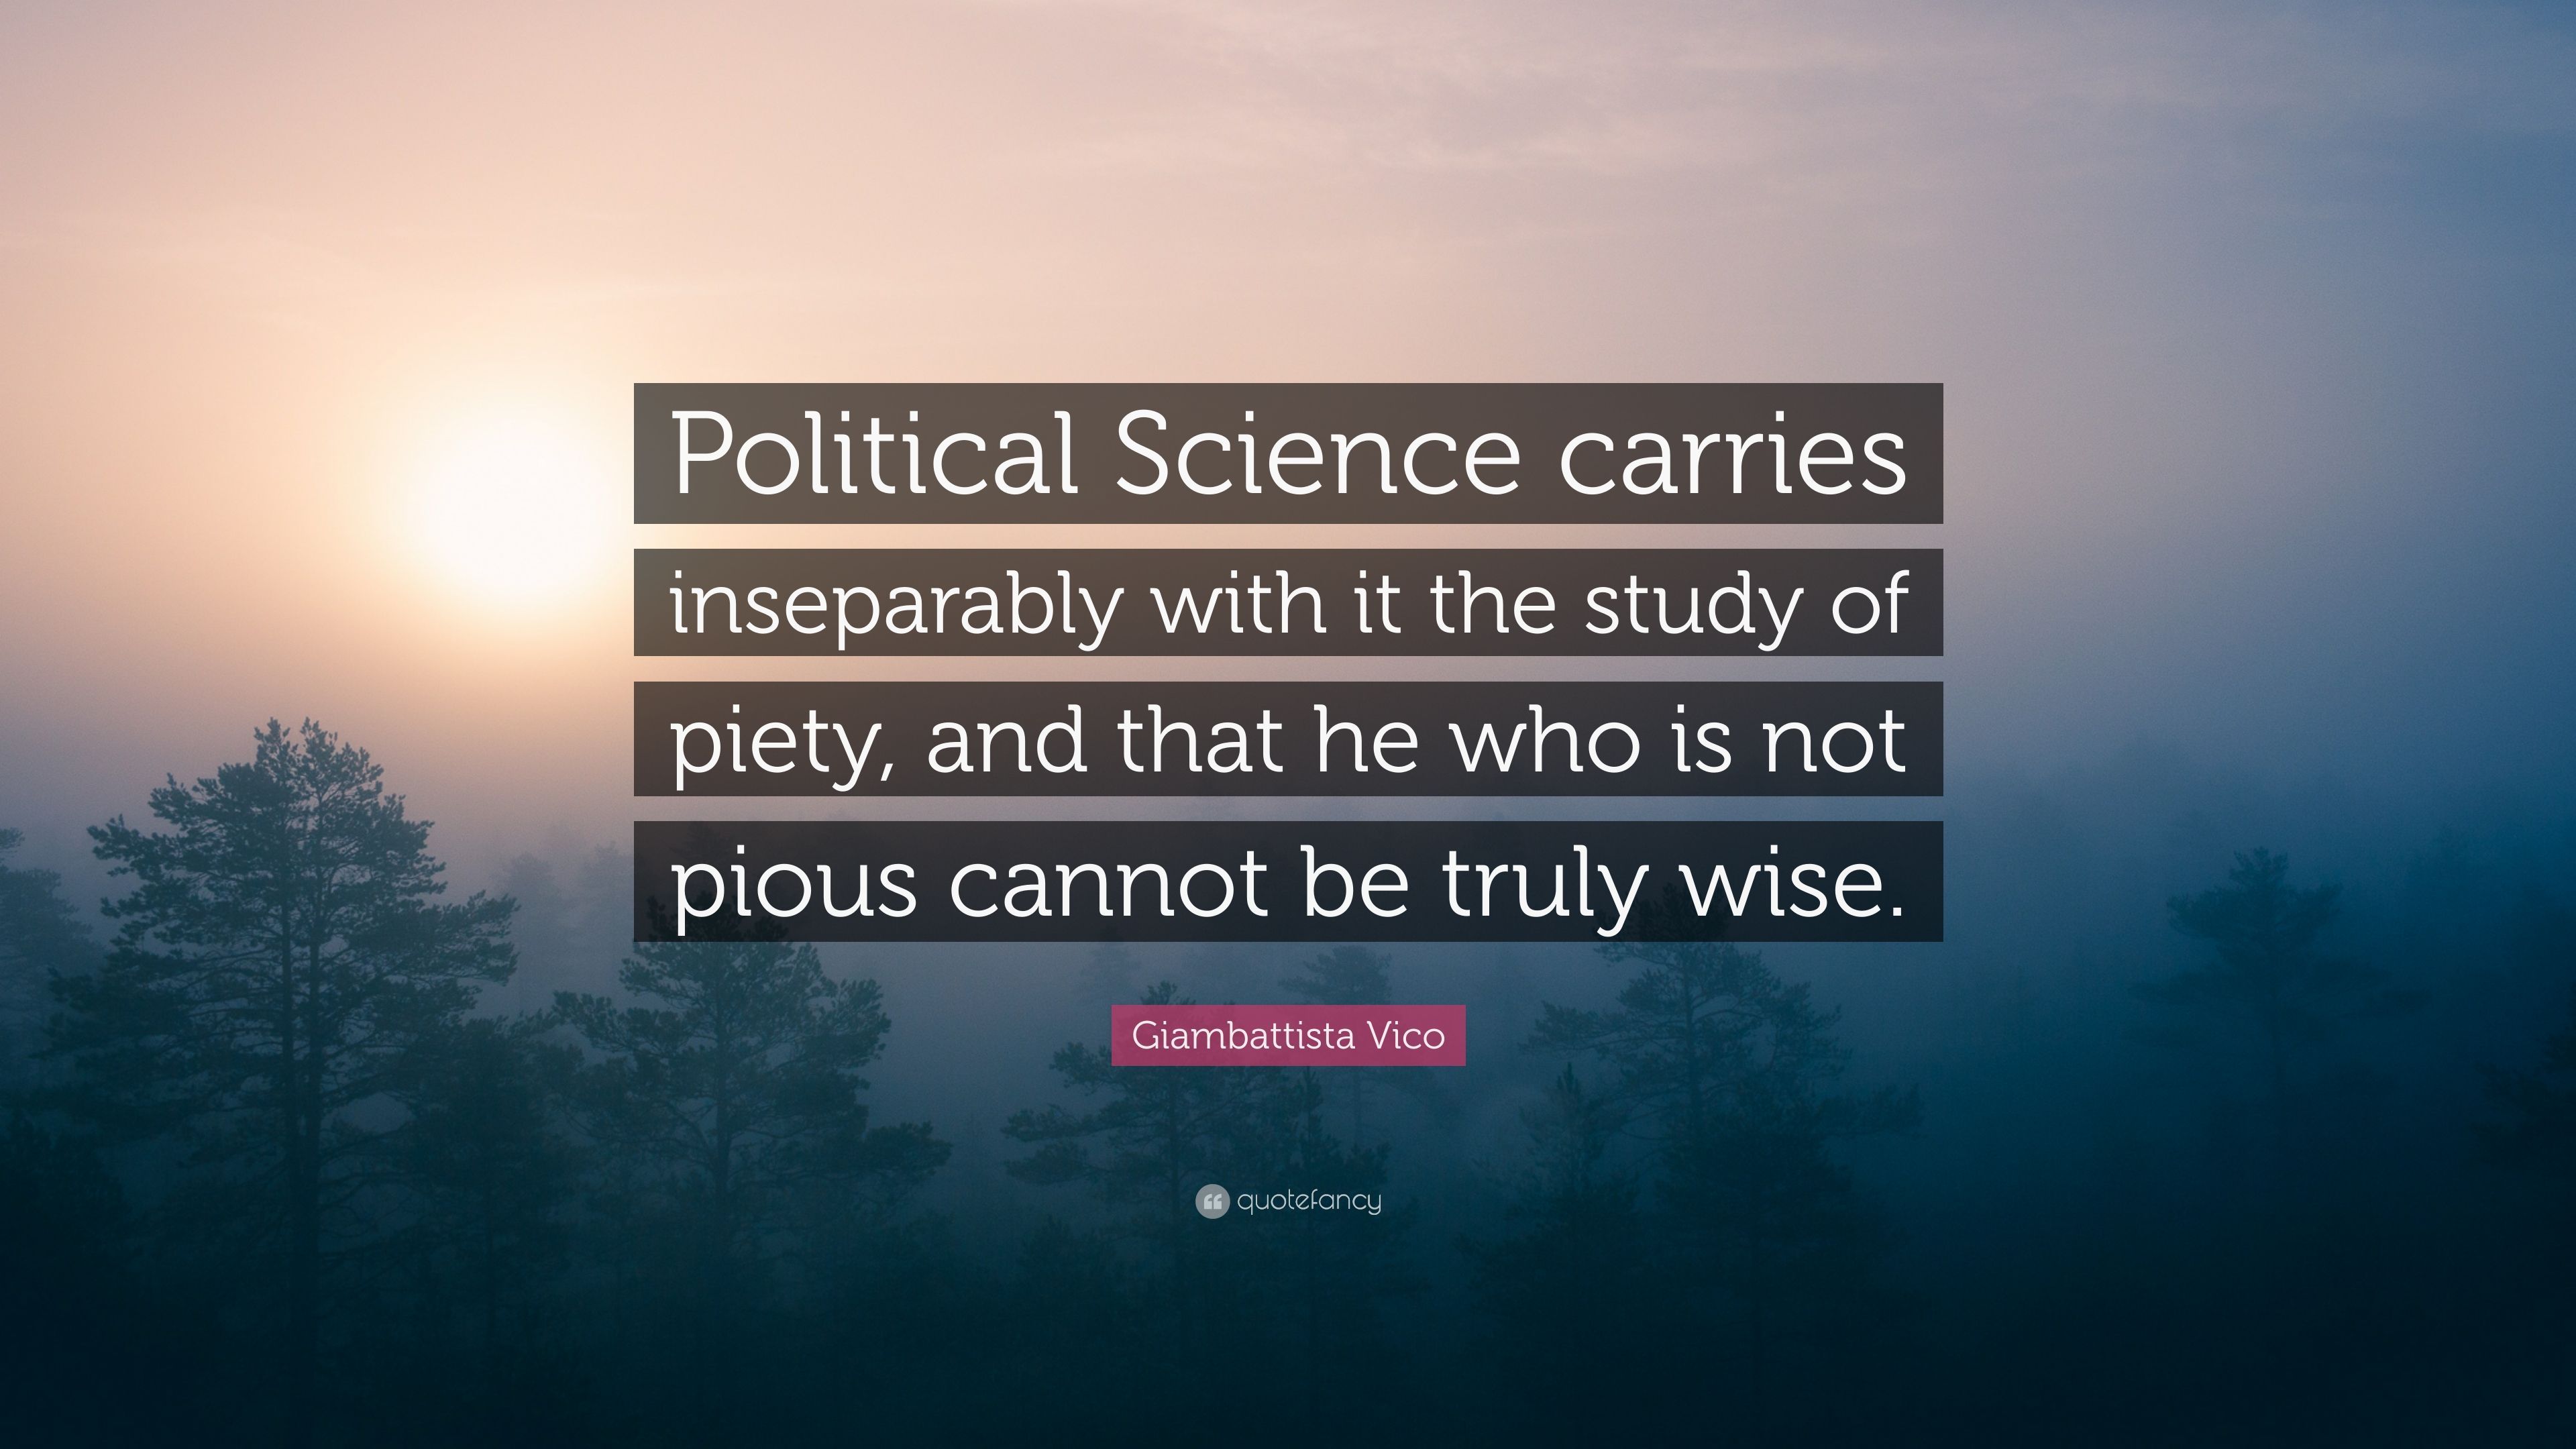 Giambattista Vico Quote: “Political Science carries inseparably with it the study of piety, and that he